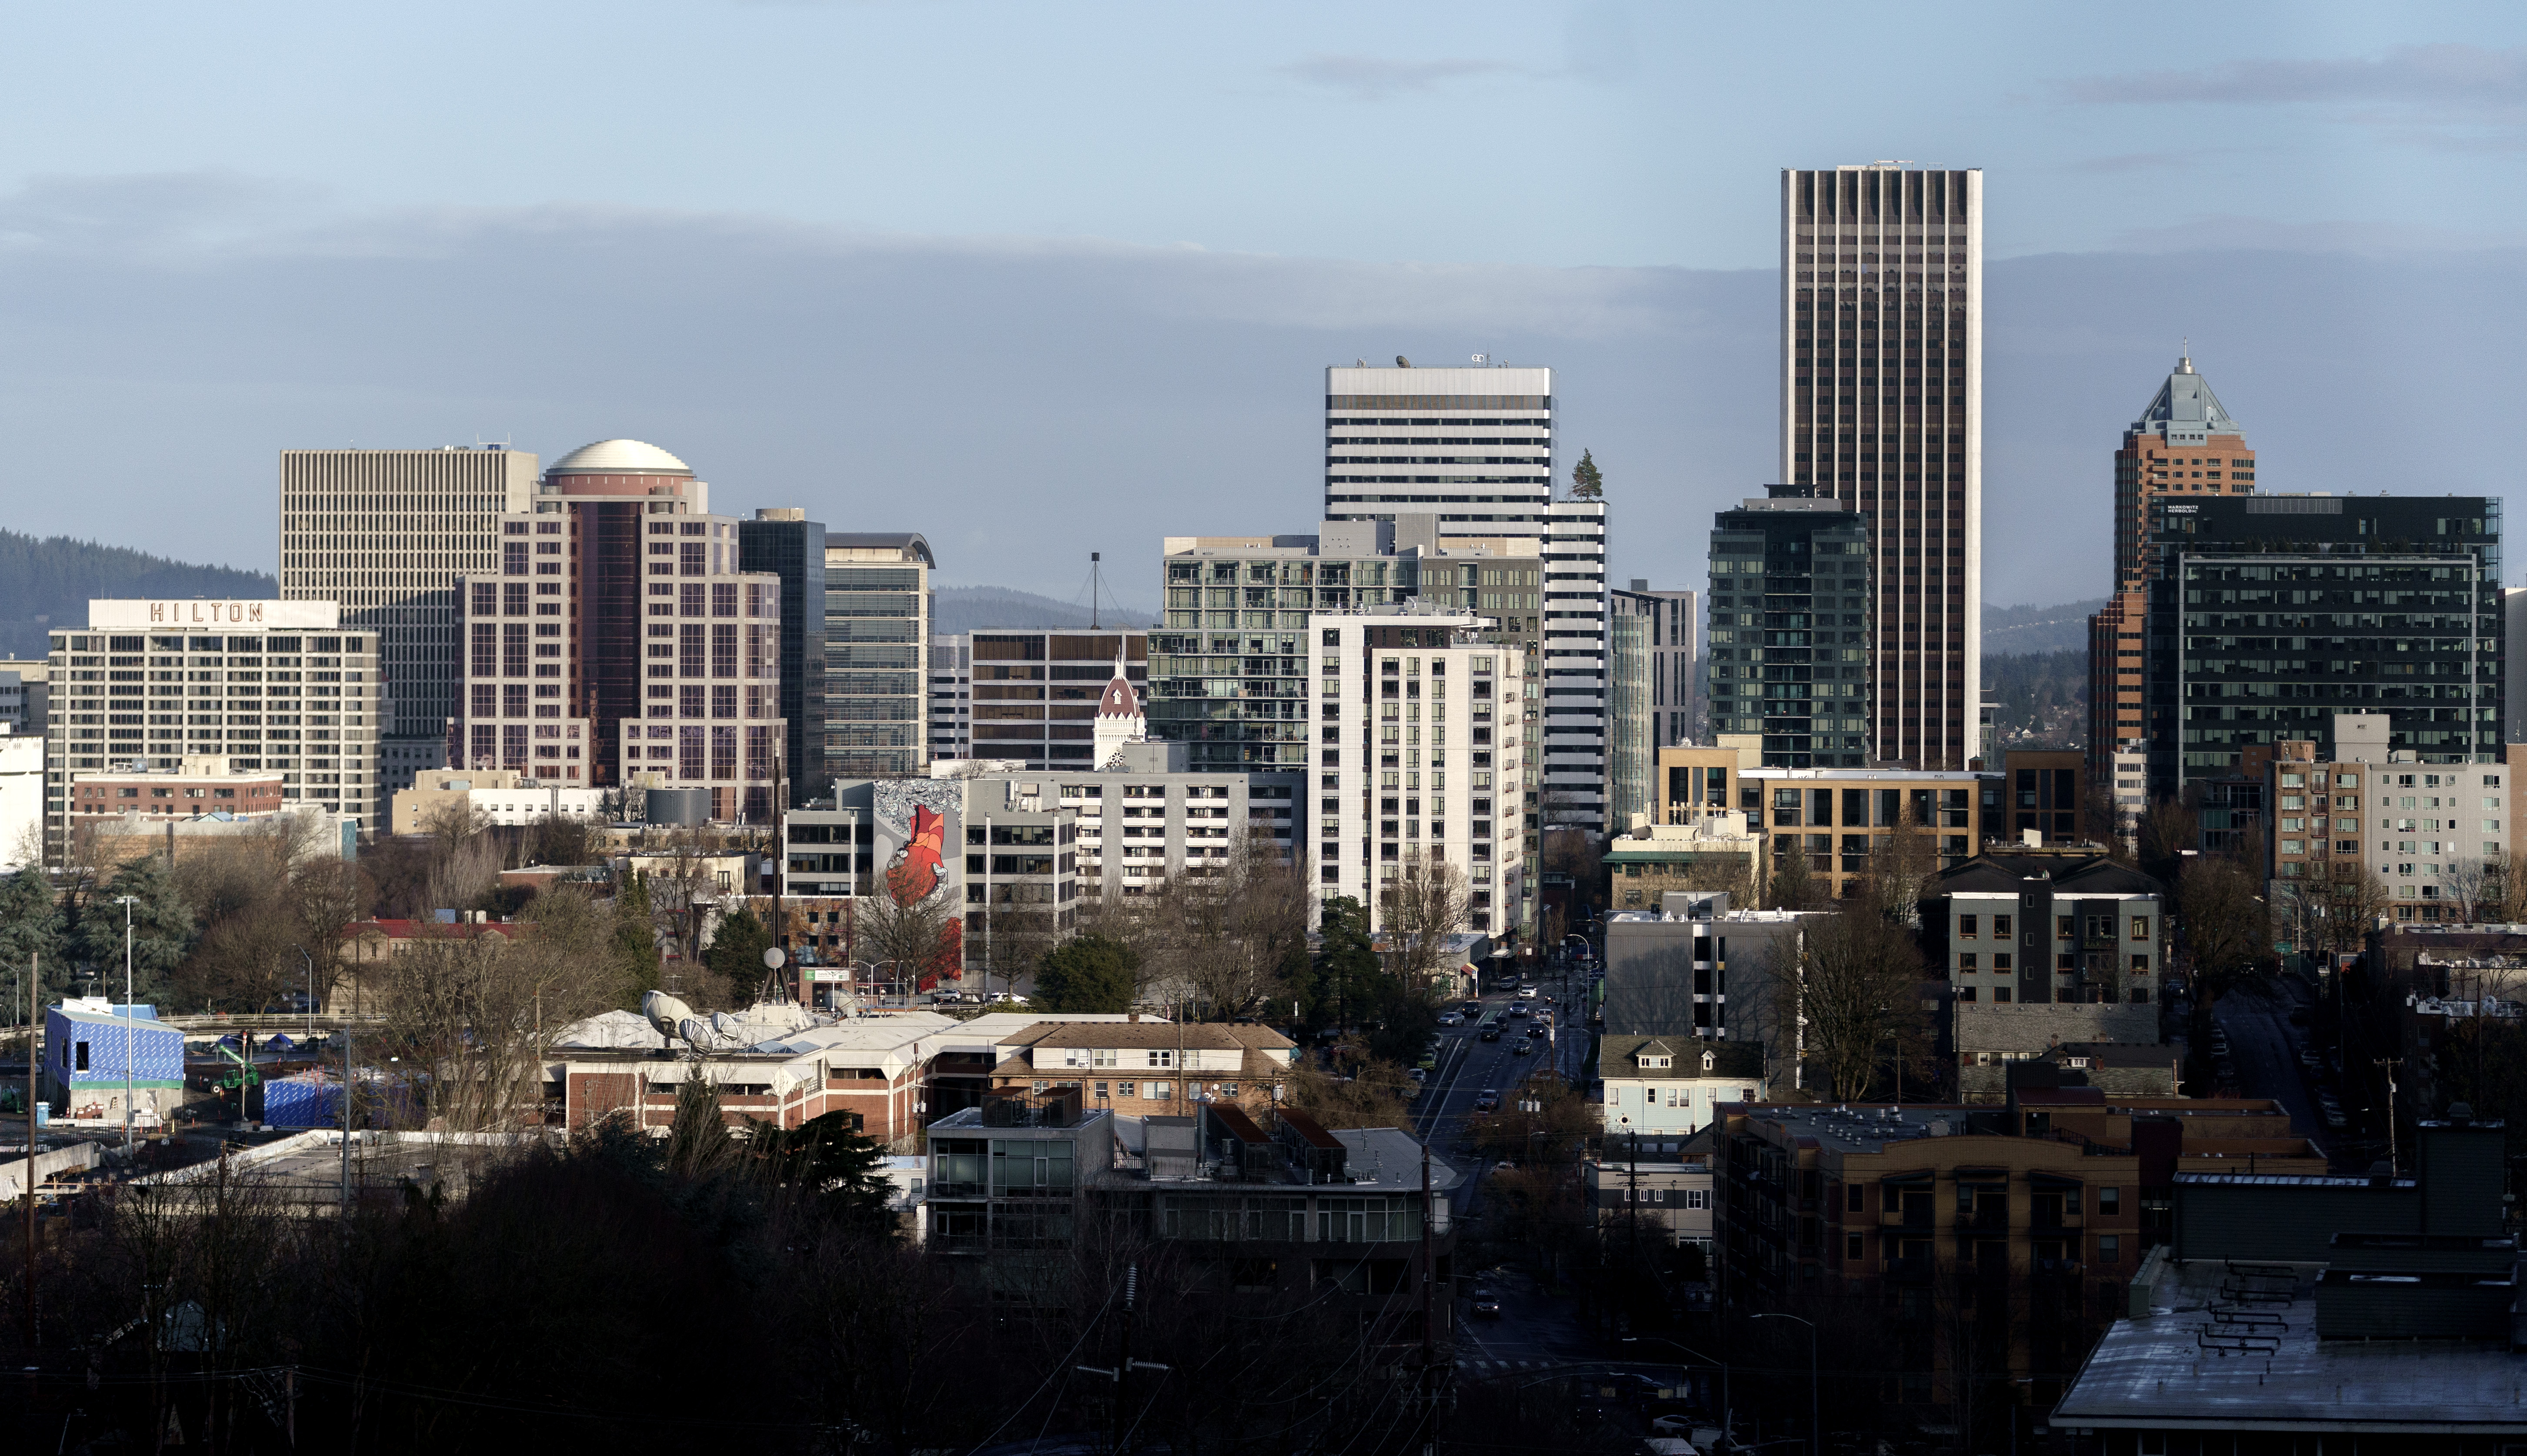 Survey shows Portland voters think city is going in wrong